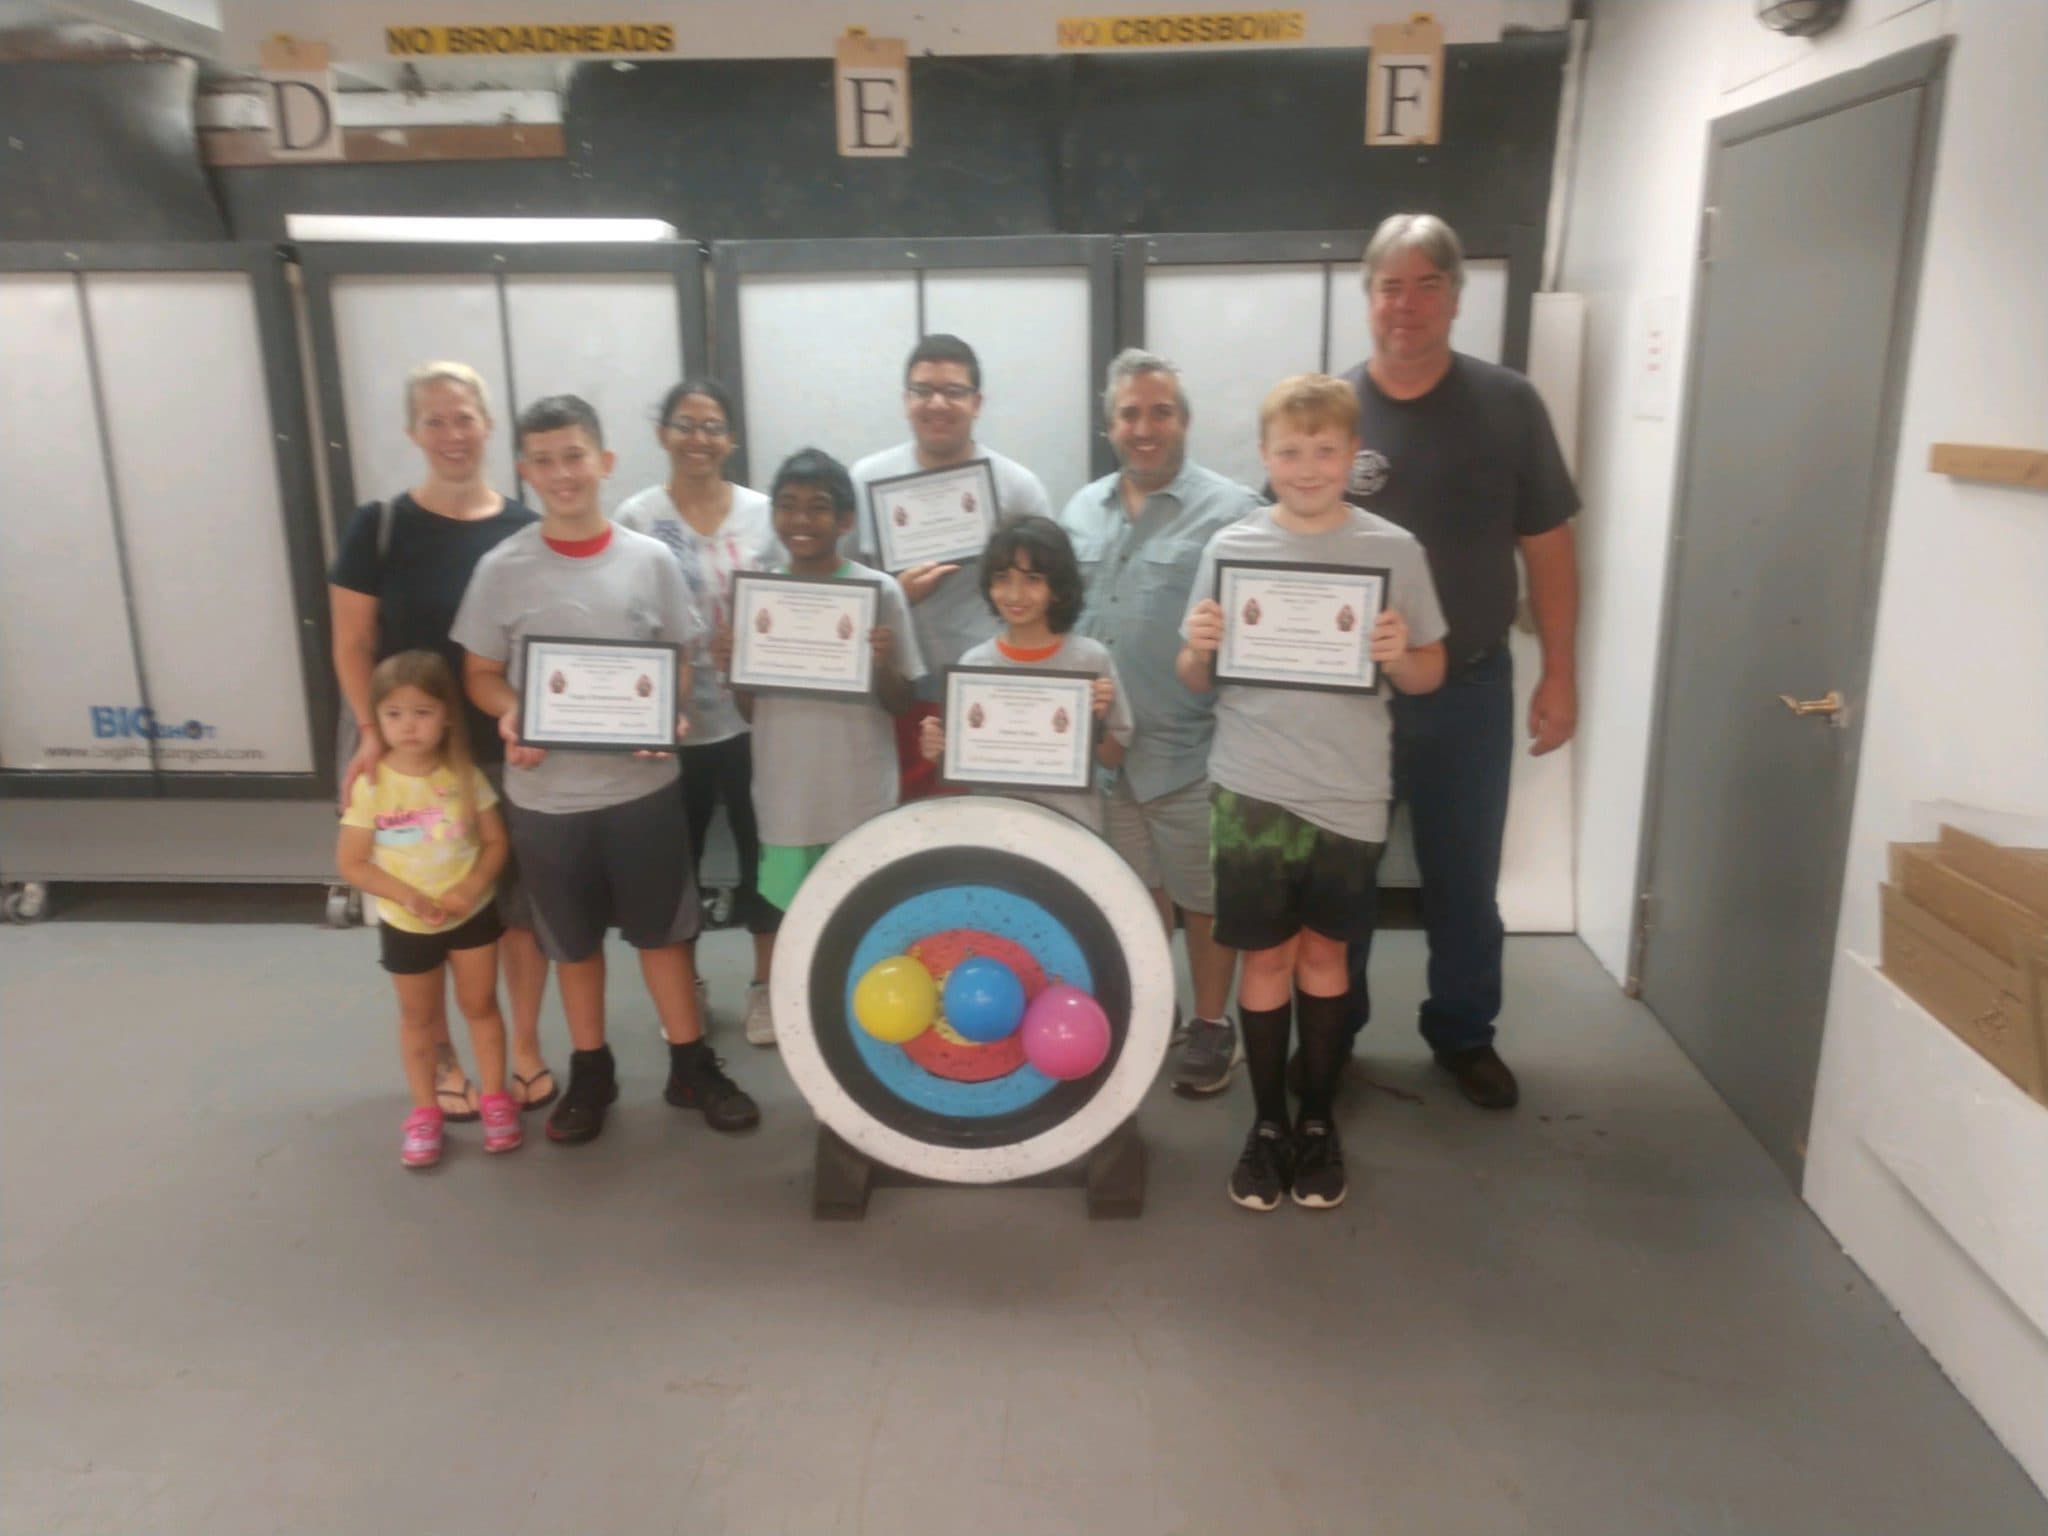 LPA Membership NASP Instructors and member volunteers successfully completed facilitating the 2021 Kids League.
The participants were presented with their League Participant Tee Shirts and certificates. In addition they were able to critique each other on their shooting skills. Through the 4 sessions they were taught the archery concepts and safety was first and foremost.
The smaller groups allowed the children to get more of a one on one instruction. Even the attending parents were given the opportunity to shoot and present their skills.
Special Thanks to all the LPA Range Instructors and Volunteer Members with assisting in the session. The attendees all had a great time and did a wonderful job! We hope to see them in future sessions at the Lincoln Park Archers Range.
